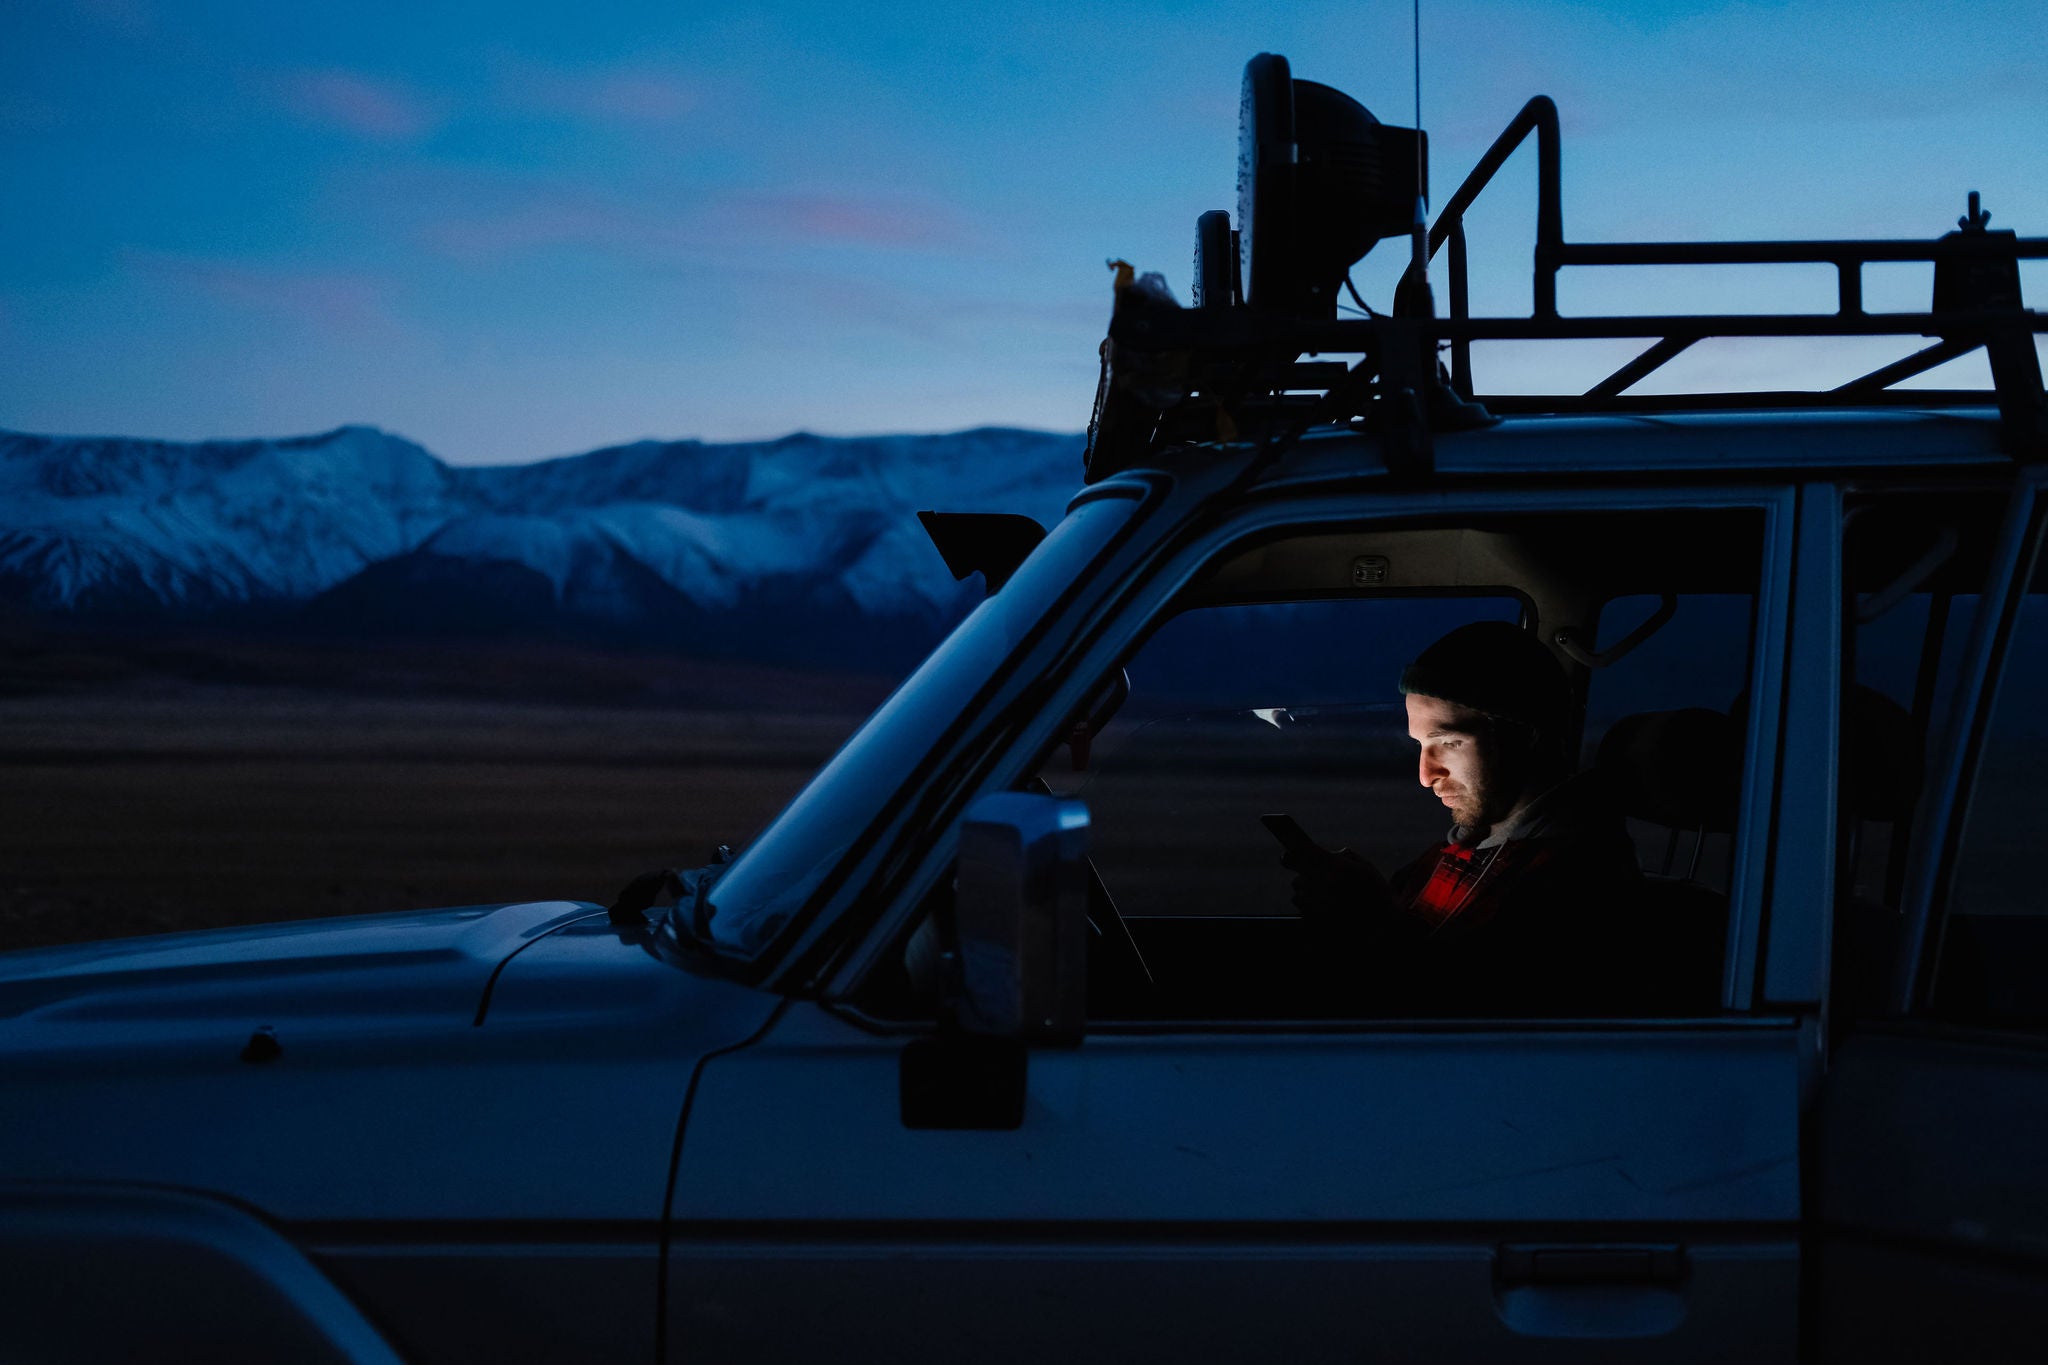 Young man using cell phone in a car at dusk.